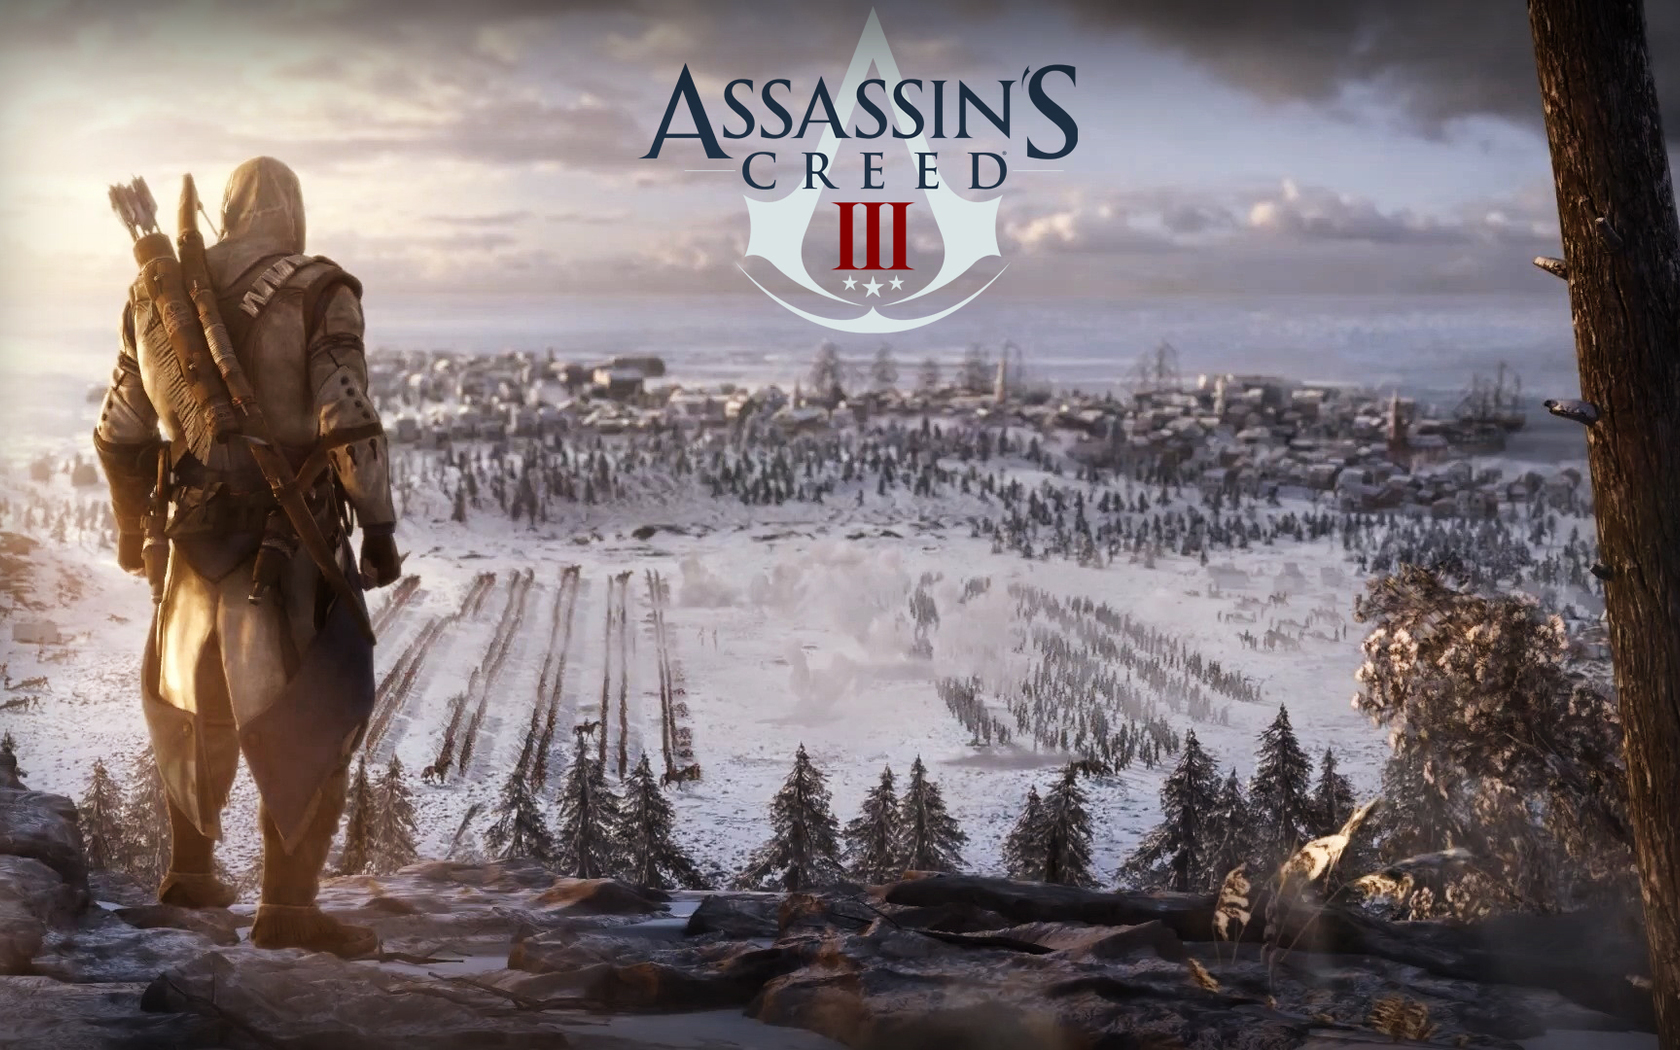 video game, assassin's creed iii, assassin's creed